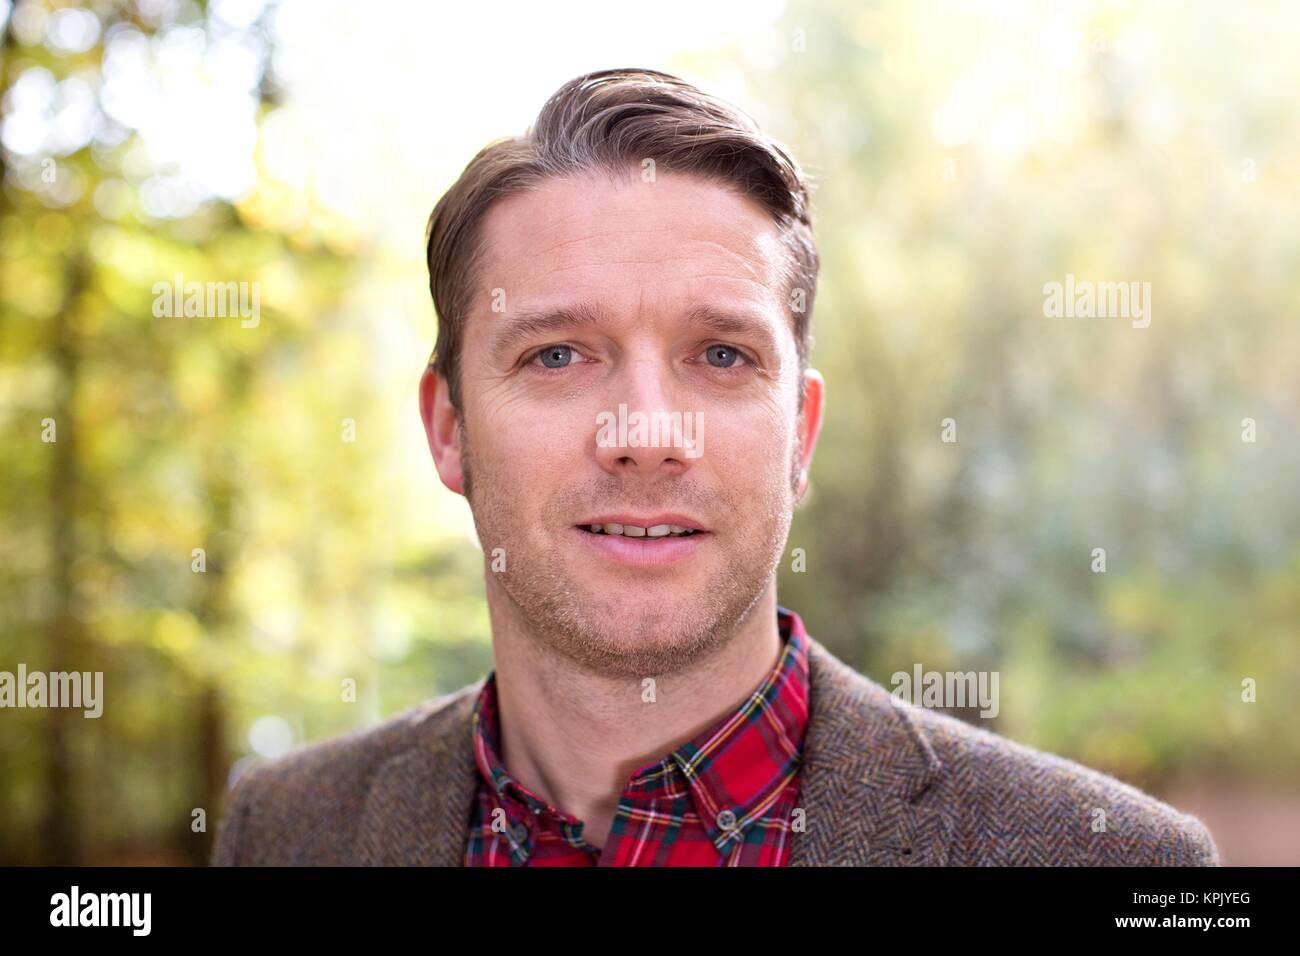 Man with quiff hairstyle, portrait. Stock Photo